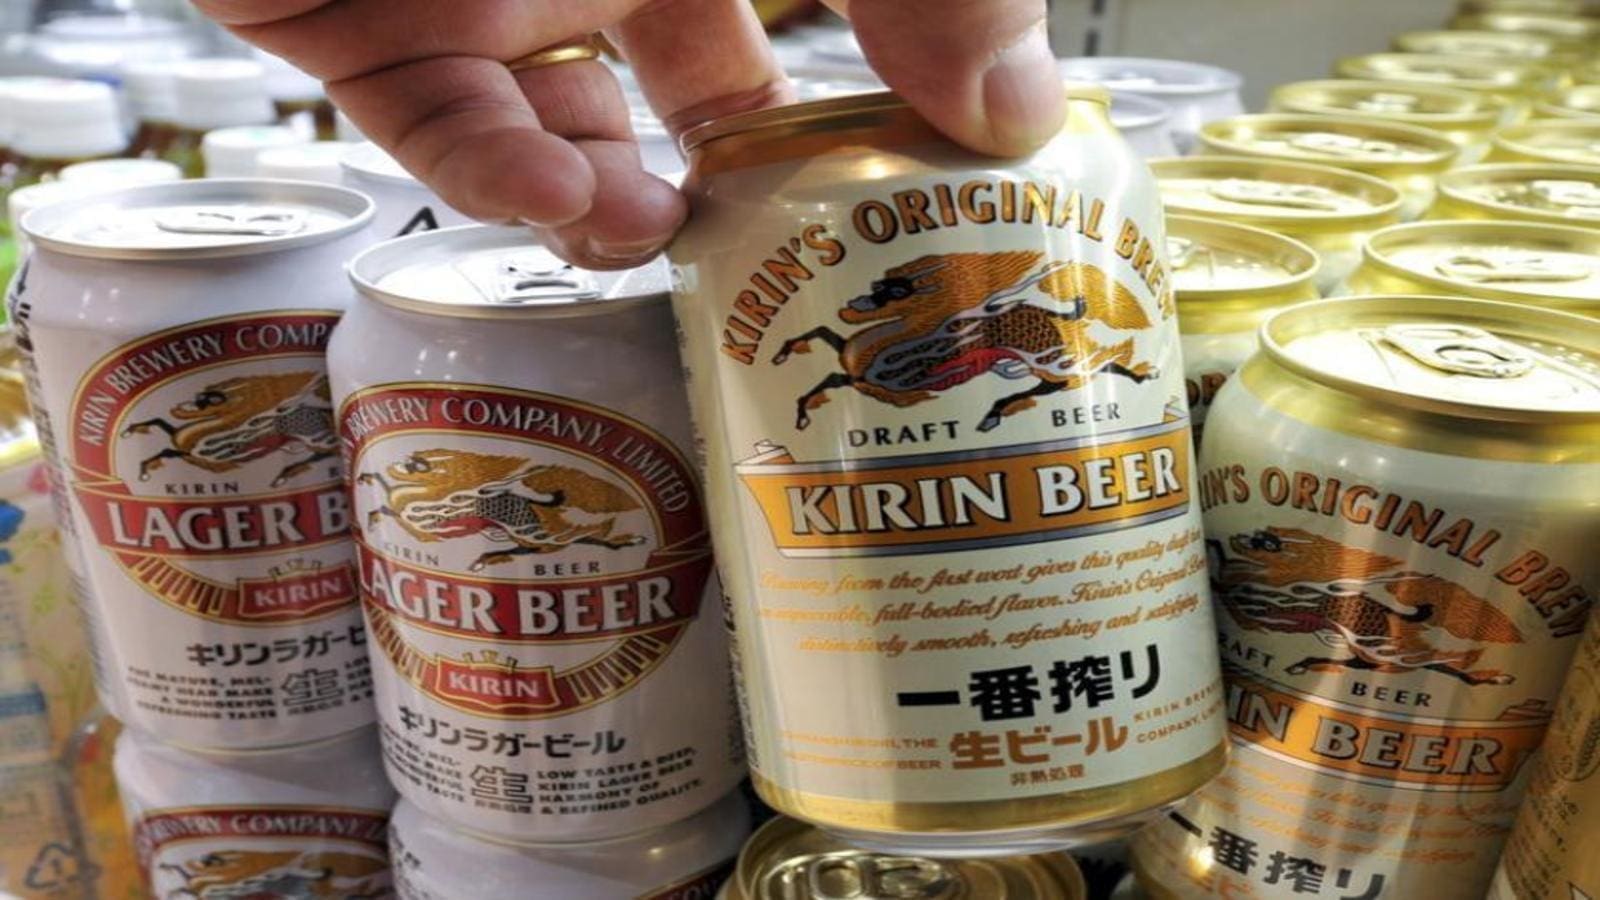 Kirin terminates partnership with Myanmar brewery partly owned by military over coup